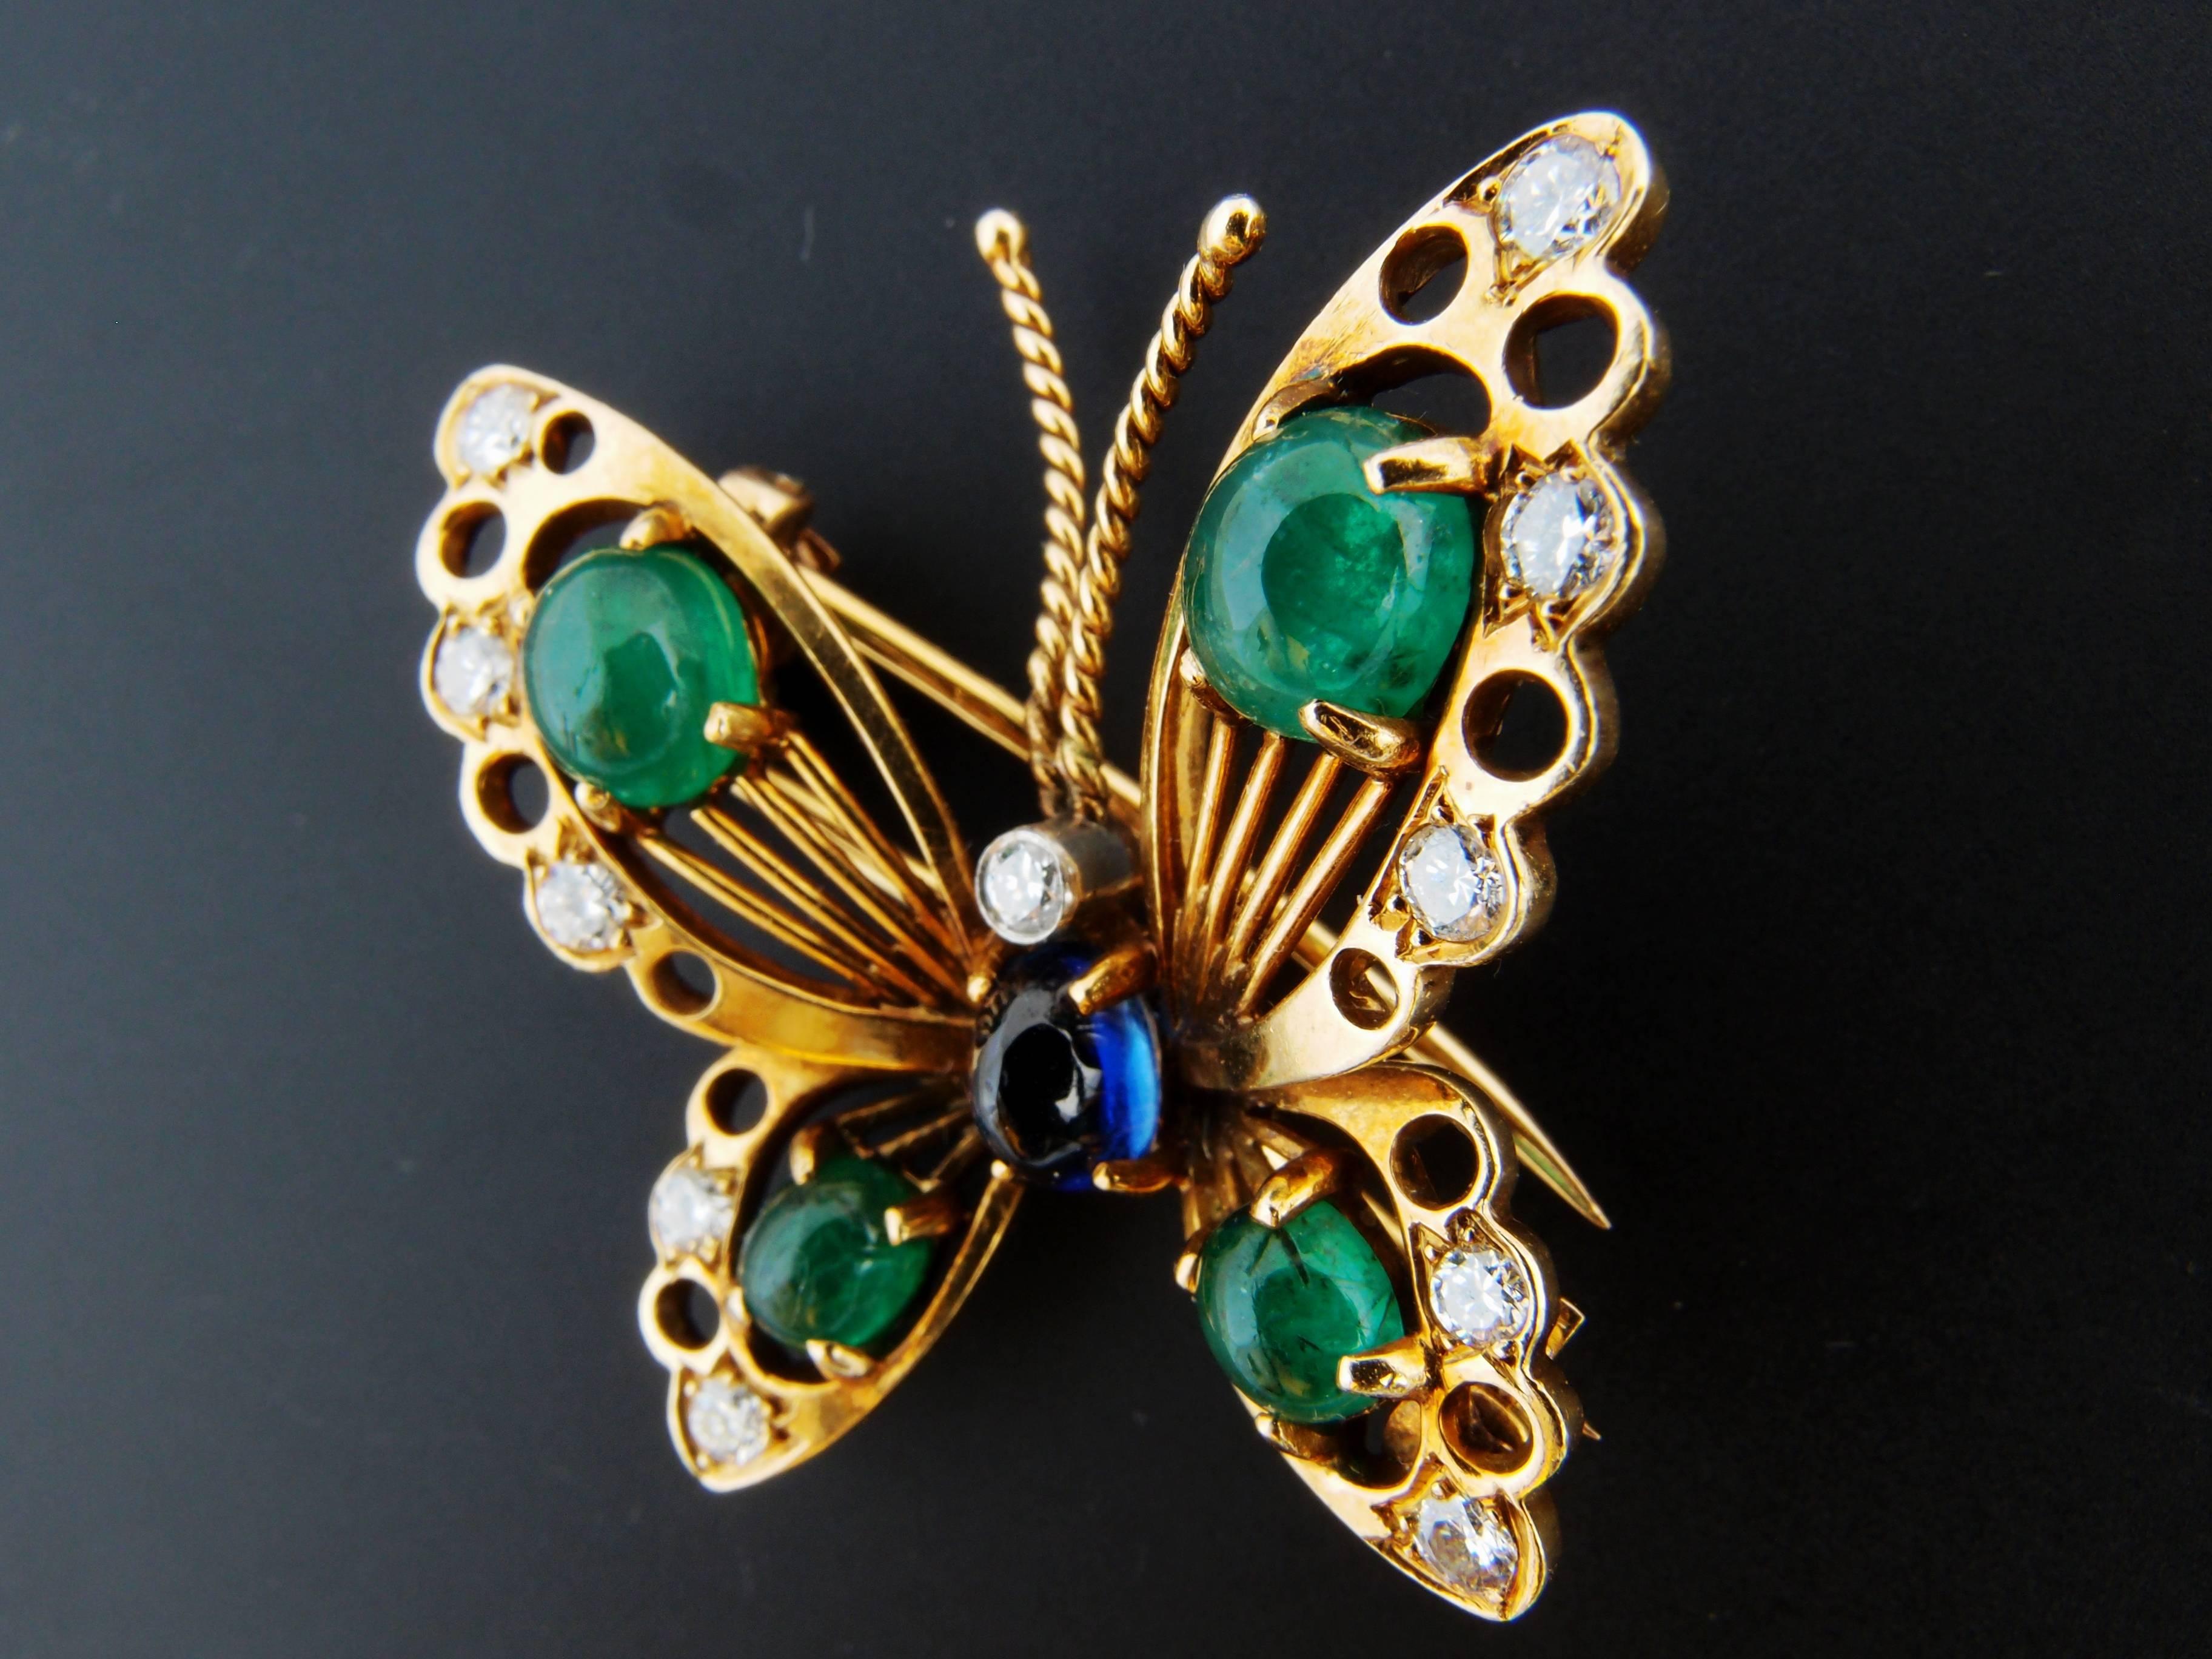 Beautiful 18 k gold hand fabricated brooch in the shape of a butterfly with one  cabochon natural blue sapphire corundum weight approximately 1 carat, four oval cabochon emerald beryls total weight 2.45 carats, 11 diamonds total weight approximately